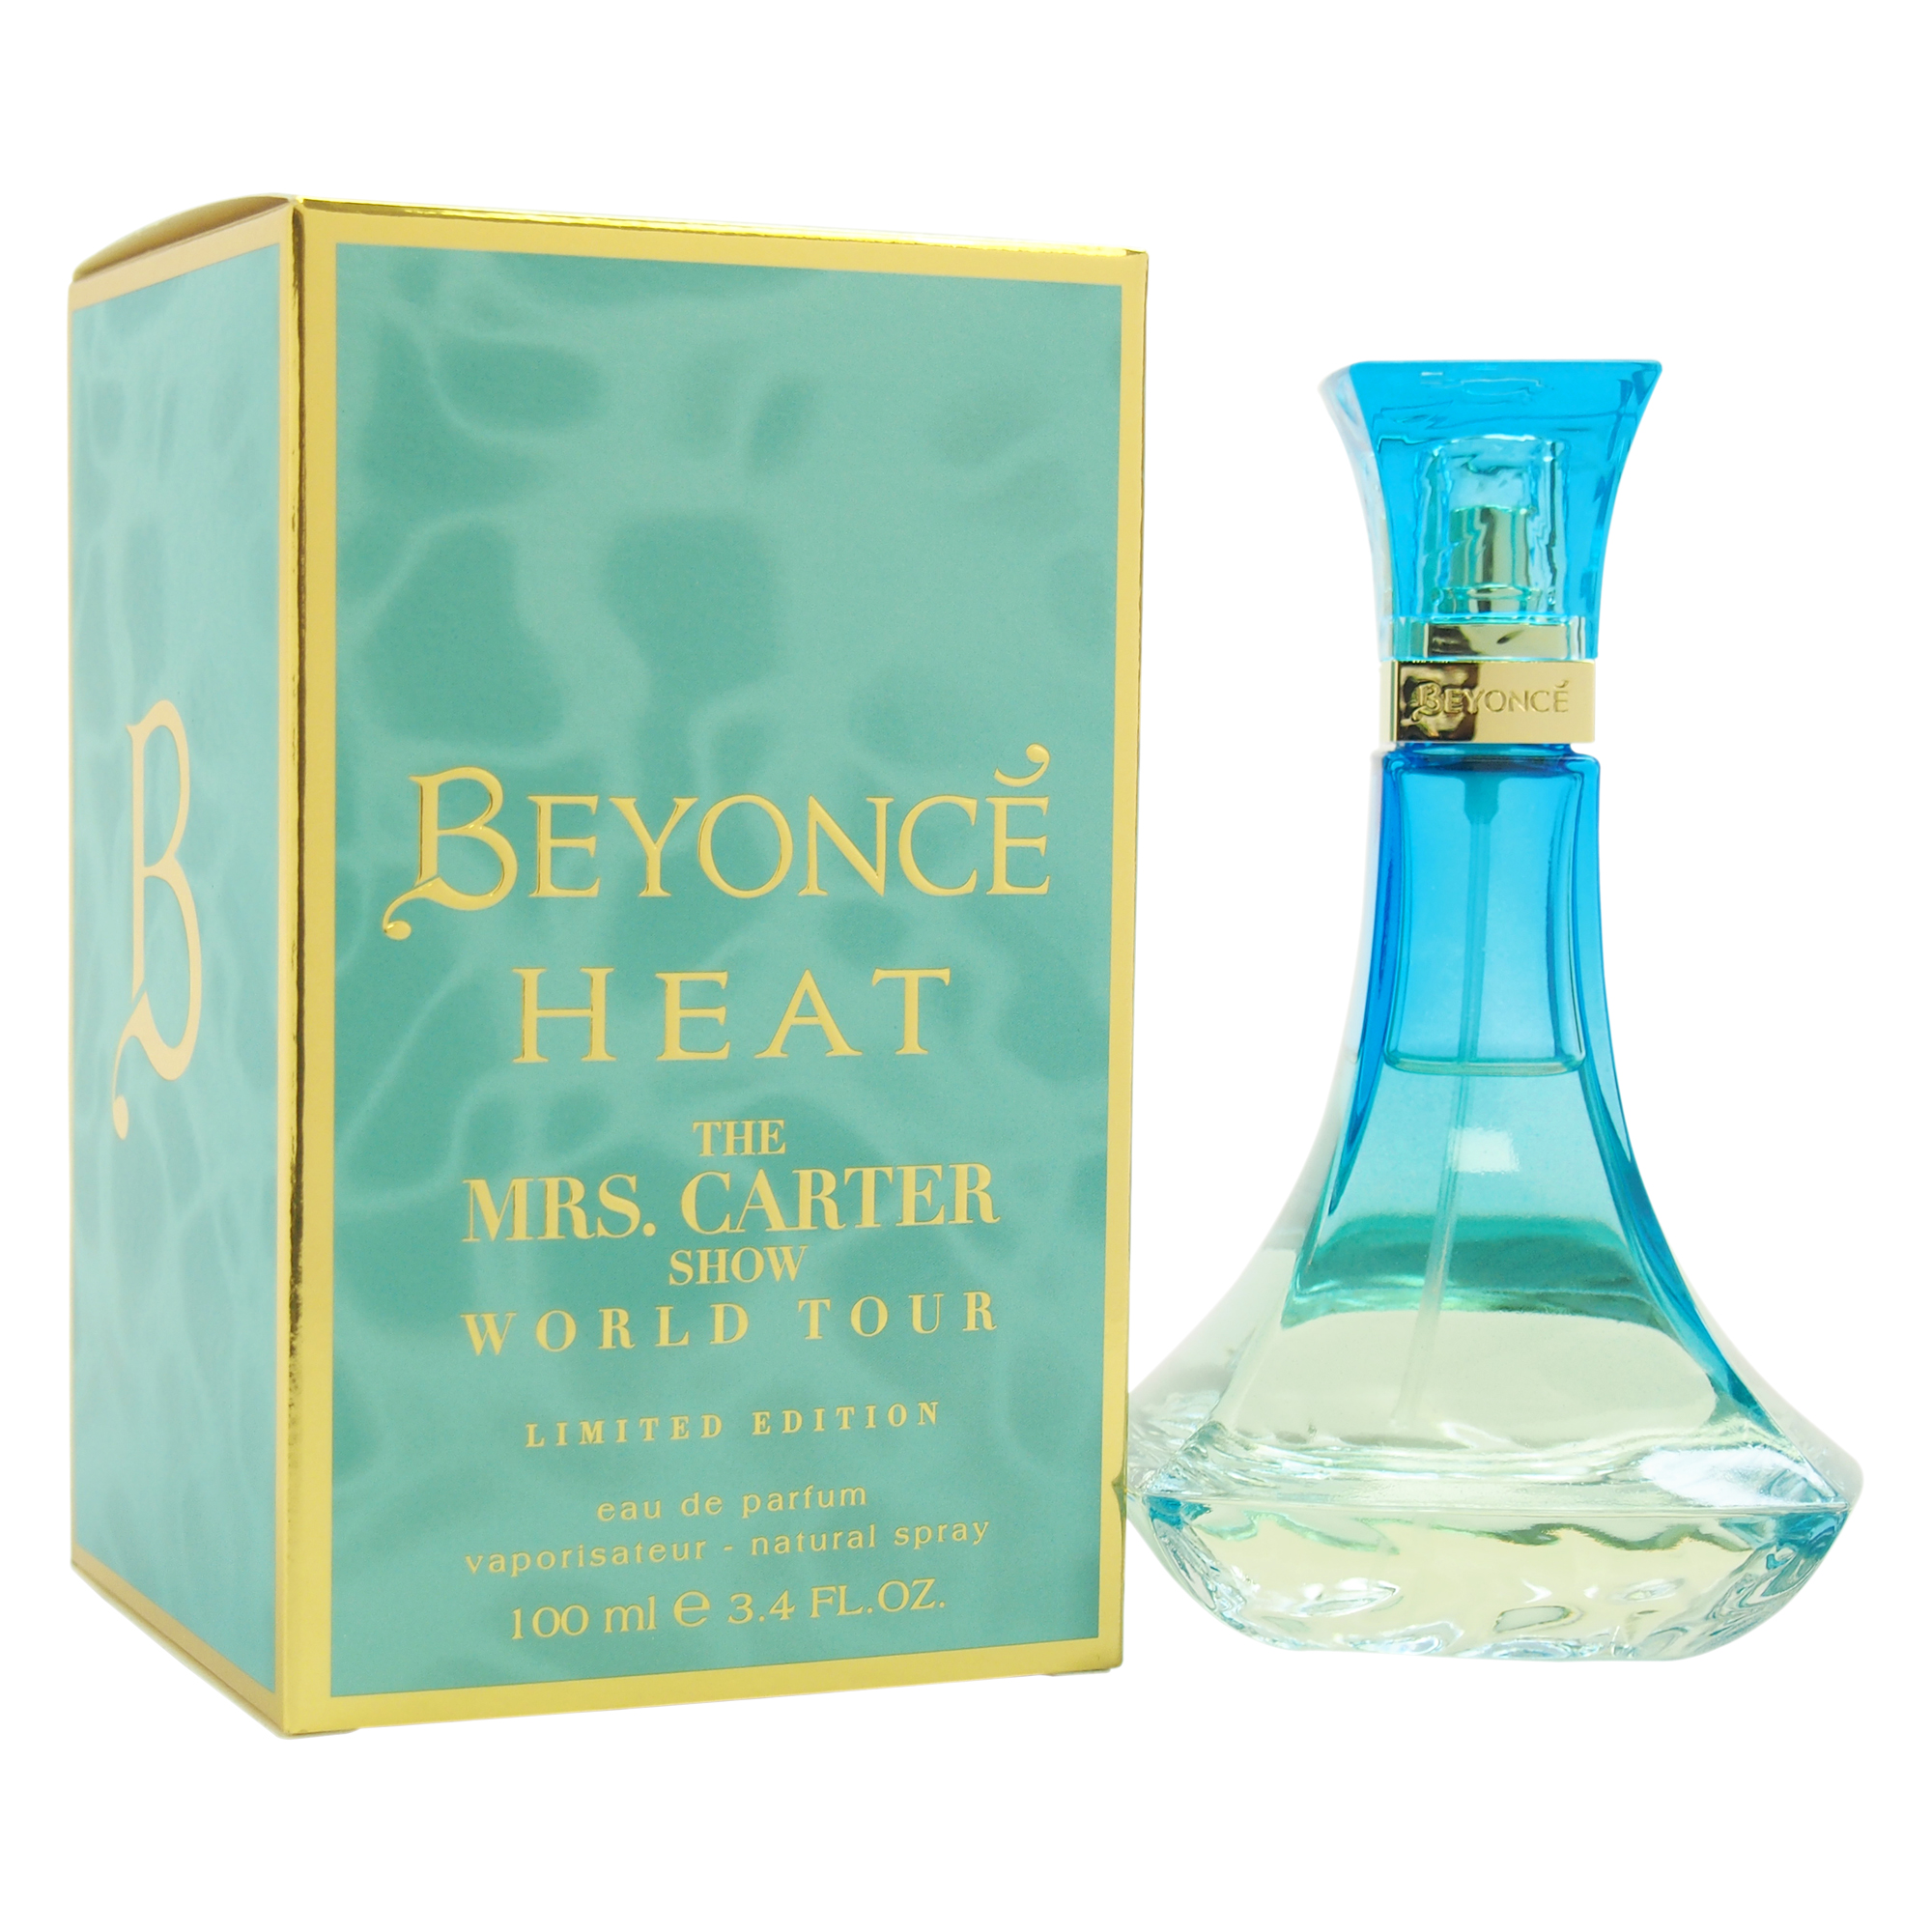 Beyonce Heat The Mrs. Carter Show World Tour by Beyonce for Women - 3.4 oz EDP Spray (Limited Edition)